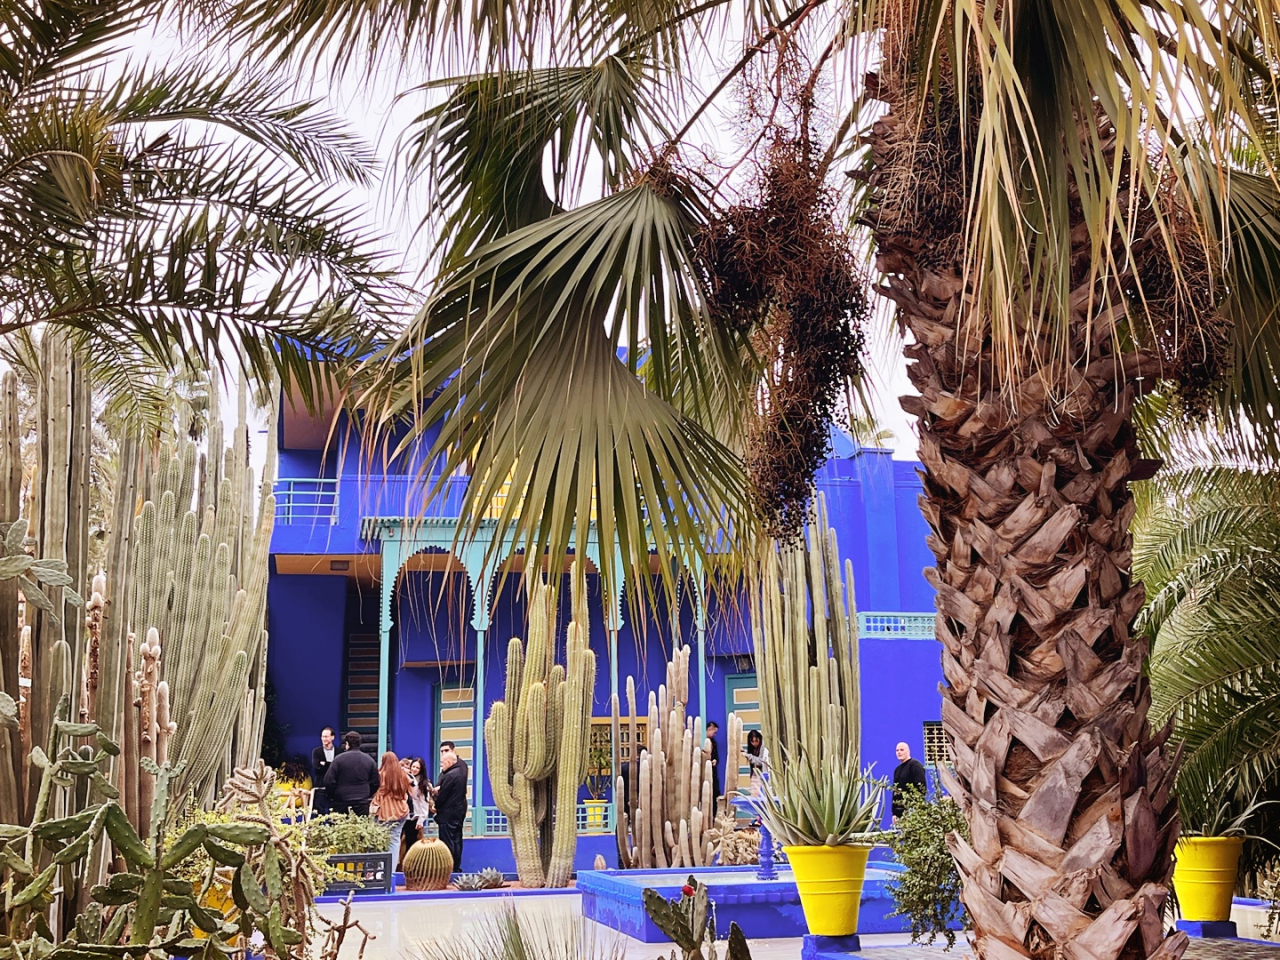 The Majorelle Garden is a one-hectare botanical garden and an artist's landscape garden in Marrakech, Morocco, designed by French artist Jacques Majorelle over 40 years starting in 1923. (Lee Jaeeun/The Korea Herald)